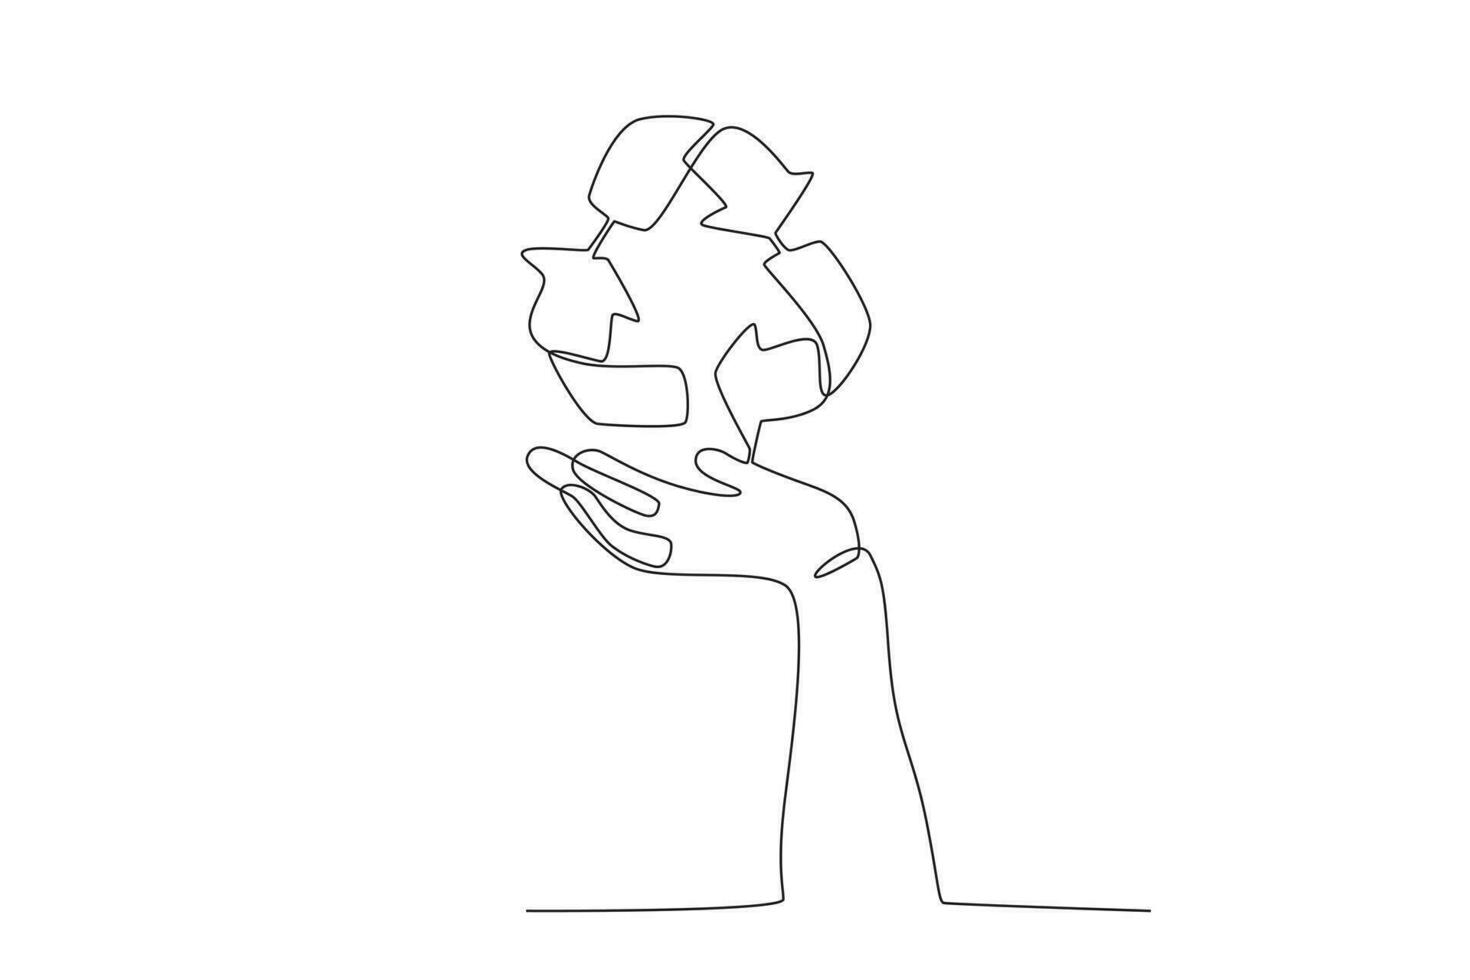 A hand and a recycling symbol vector